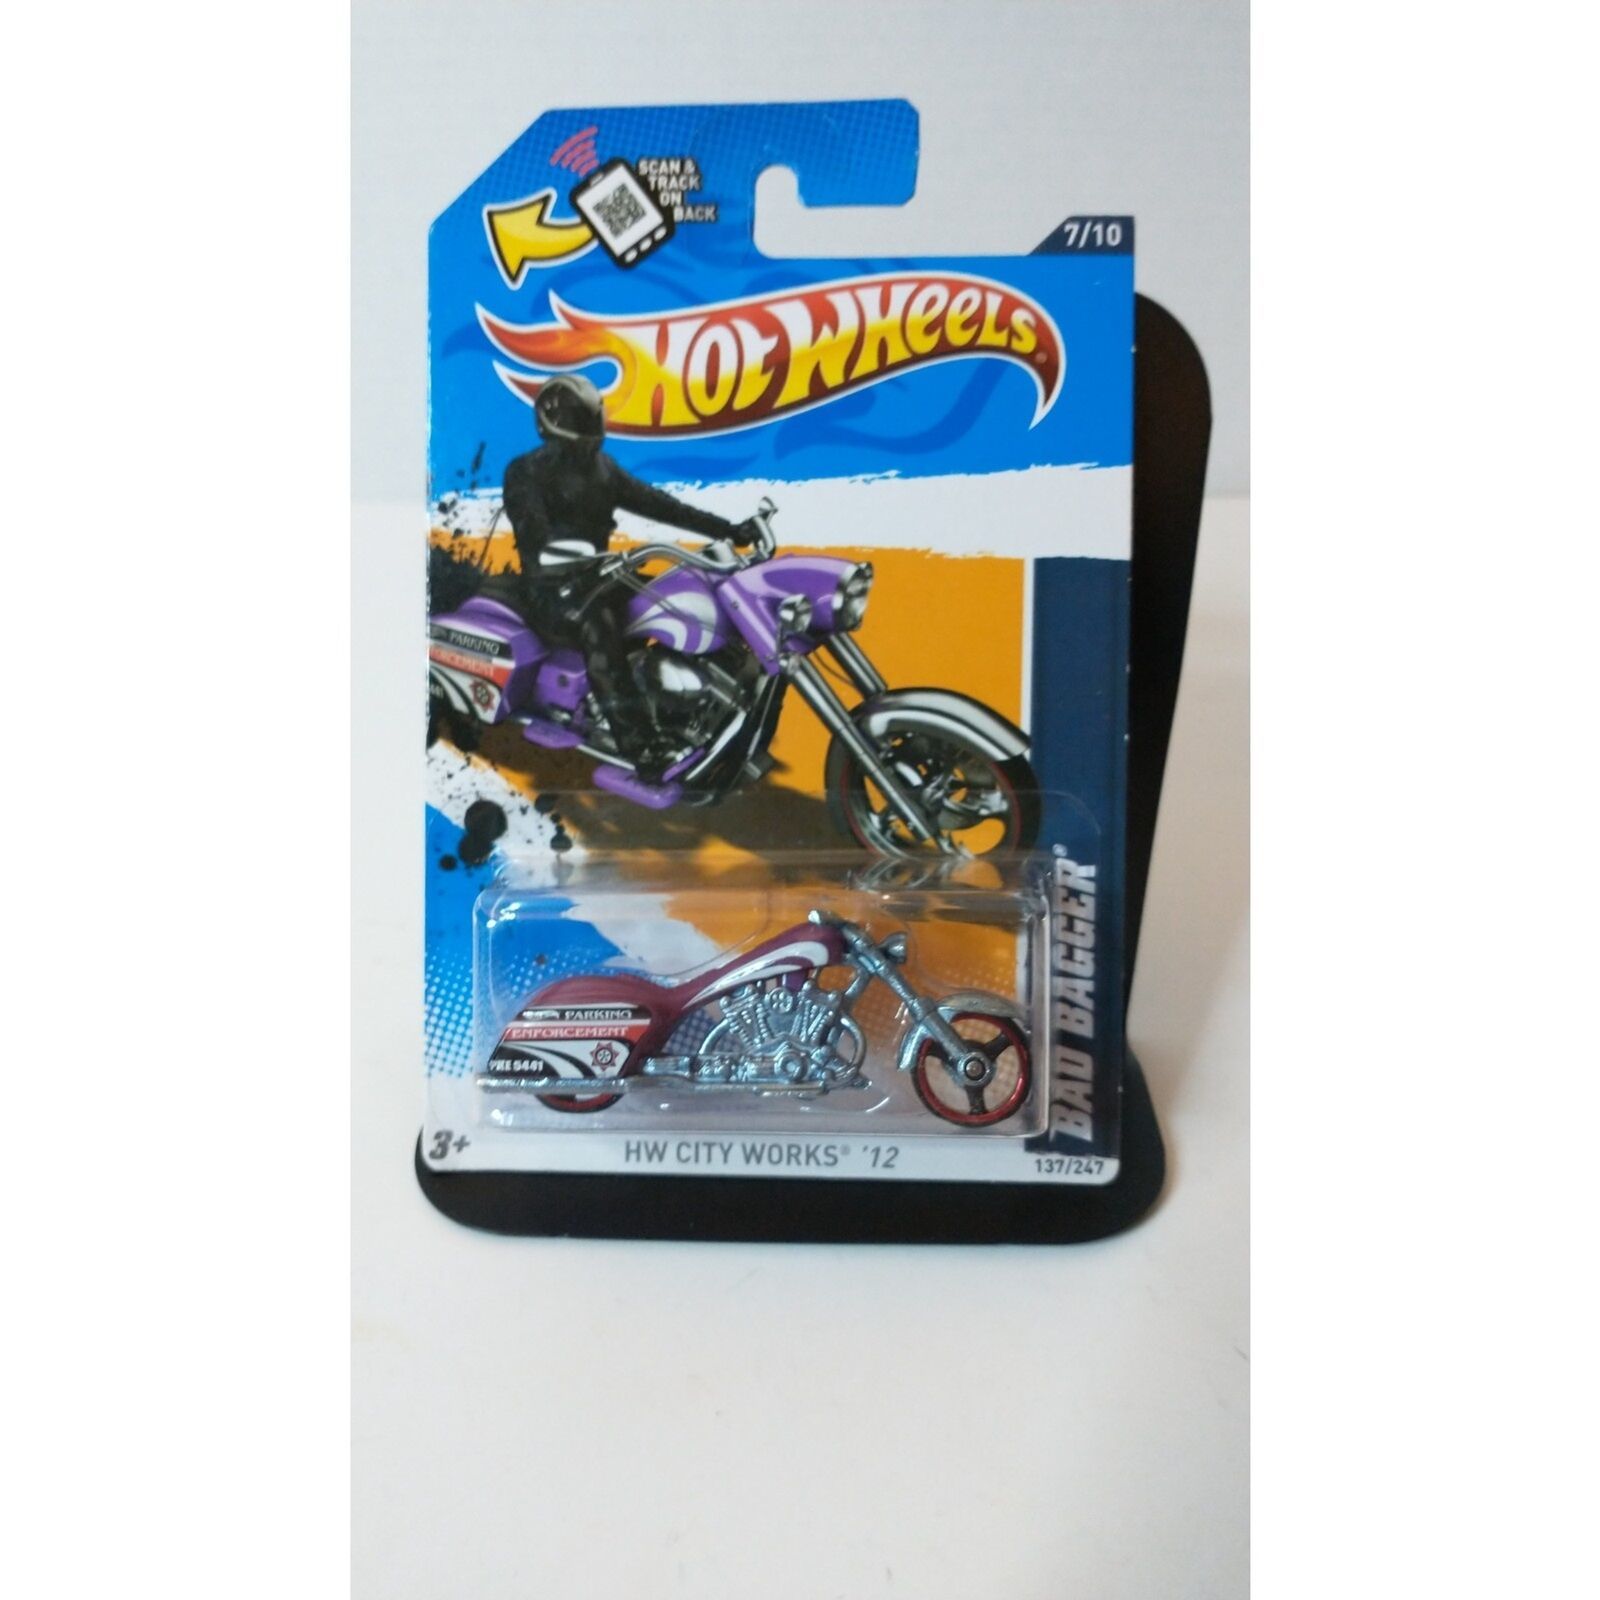 Primary image for Hot Wheels 2012 HW City Works Bad Bagger Purple Police - New in Package